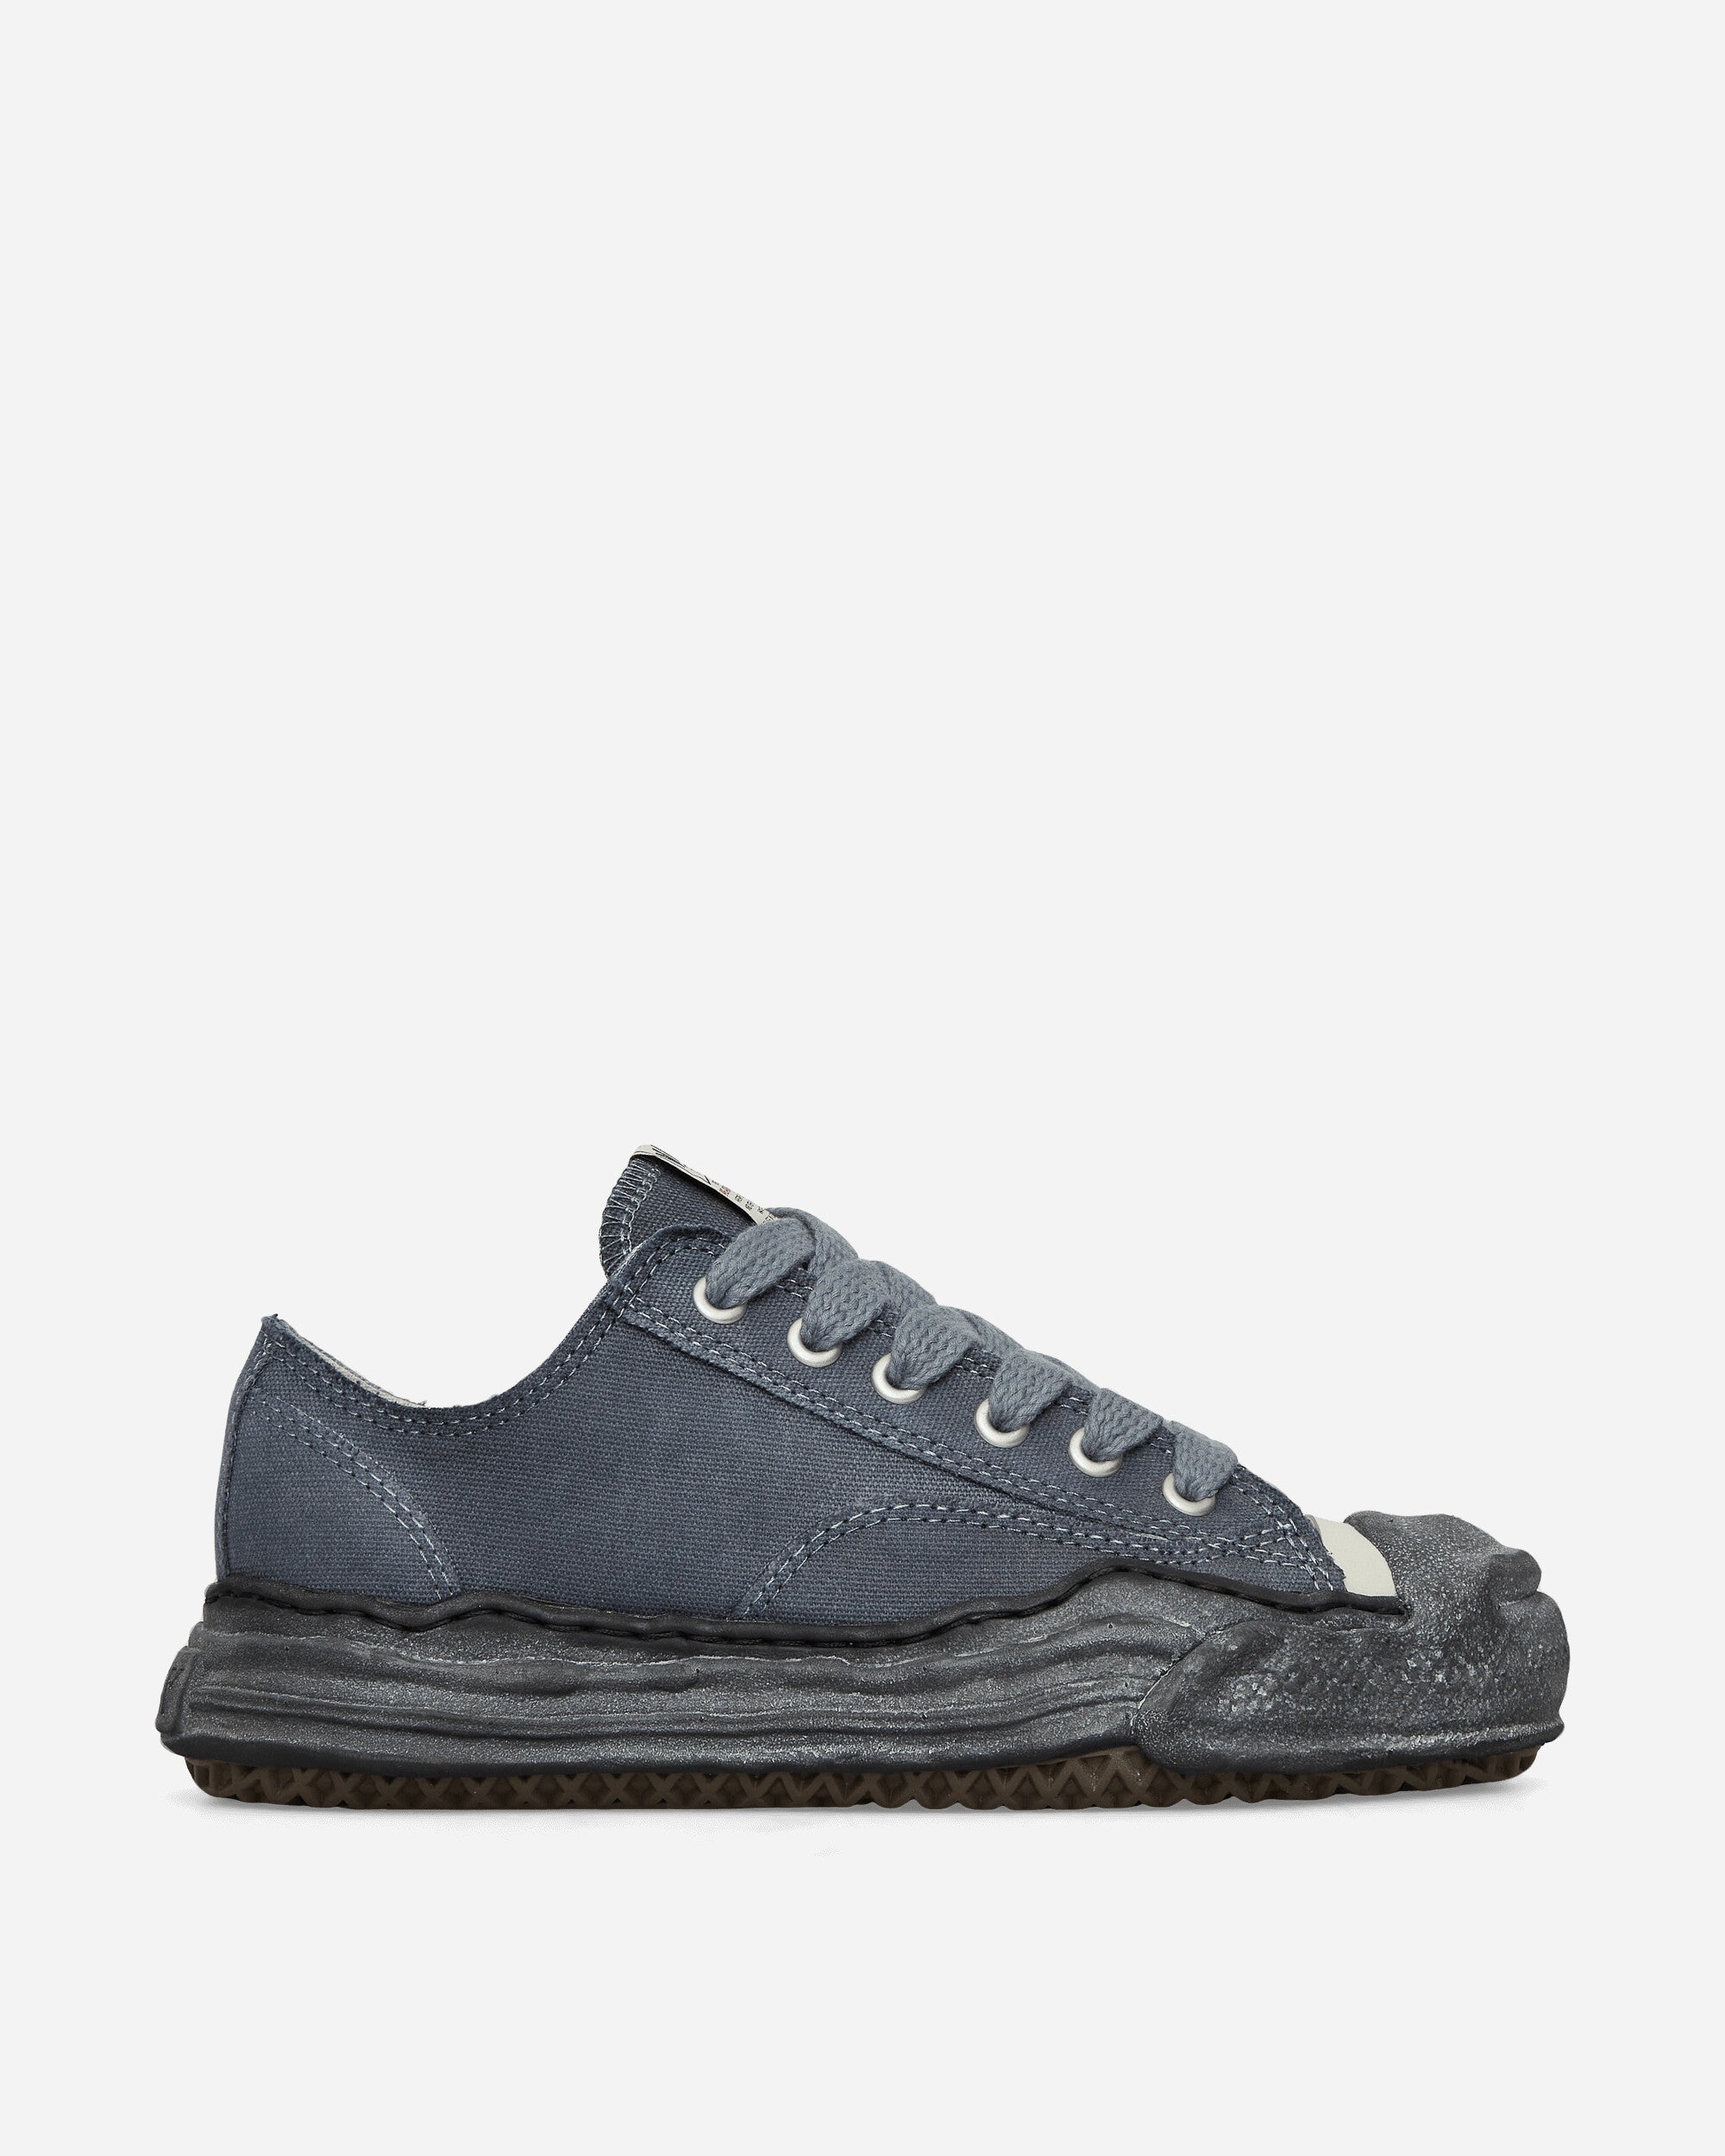 Hank OG Sole Over-Dyed Canvas Low Sneakers Black